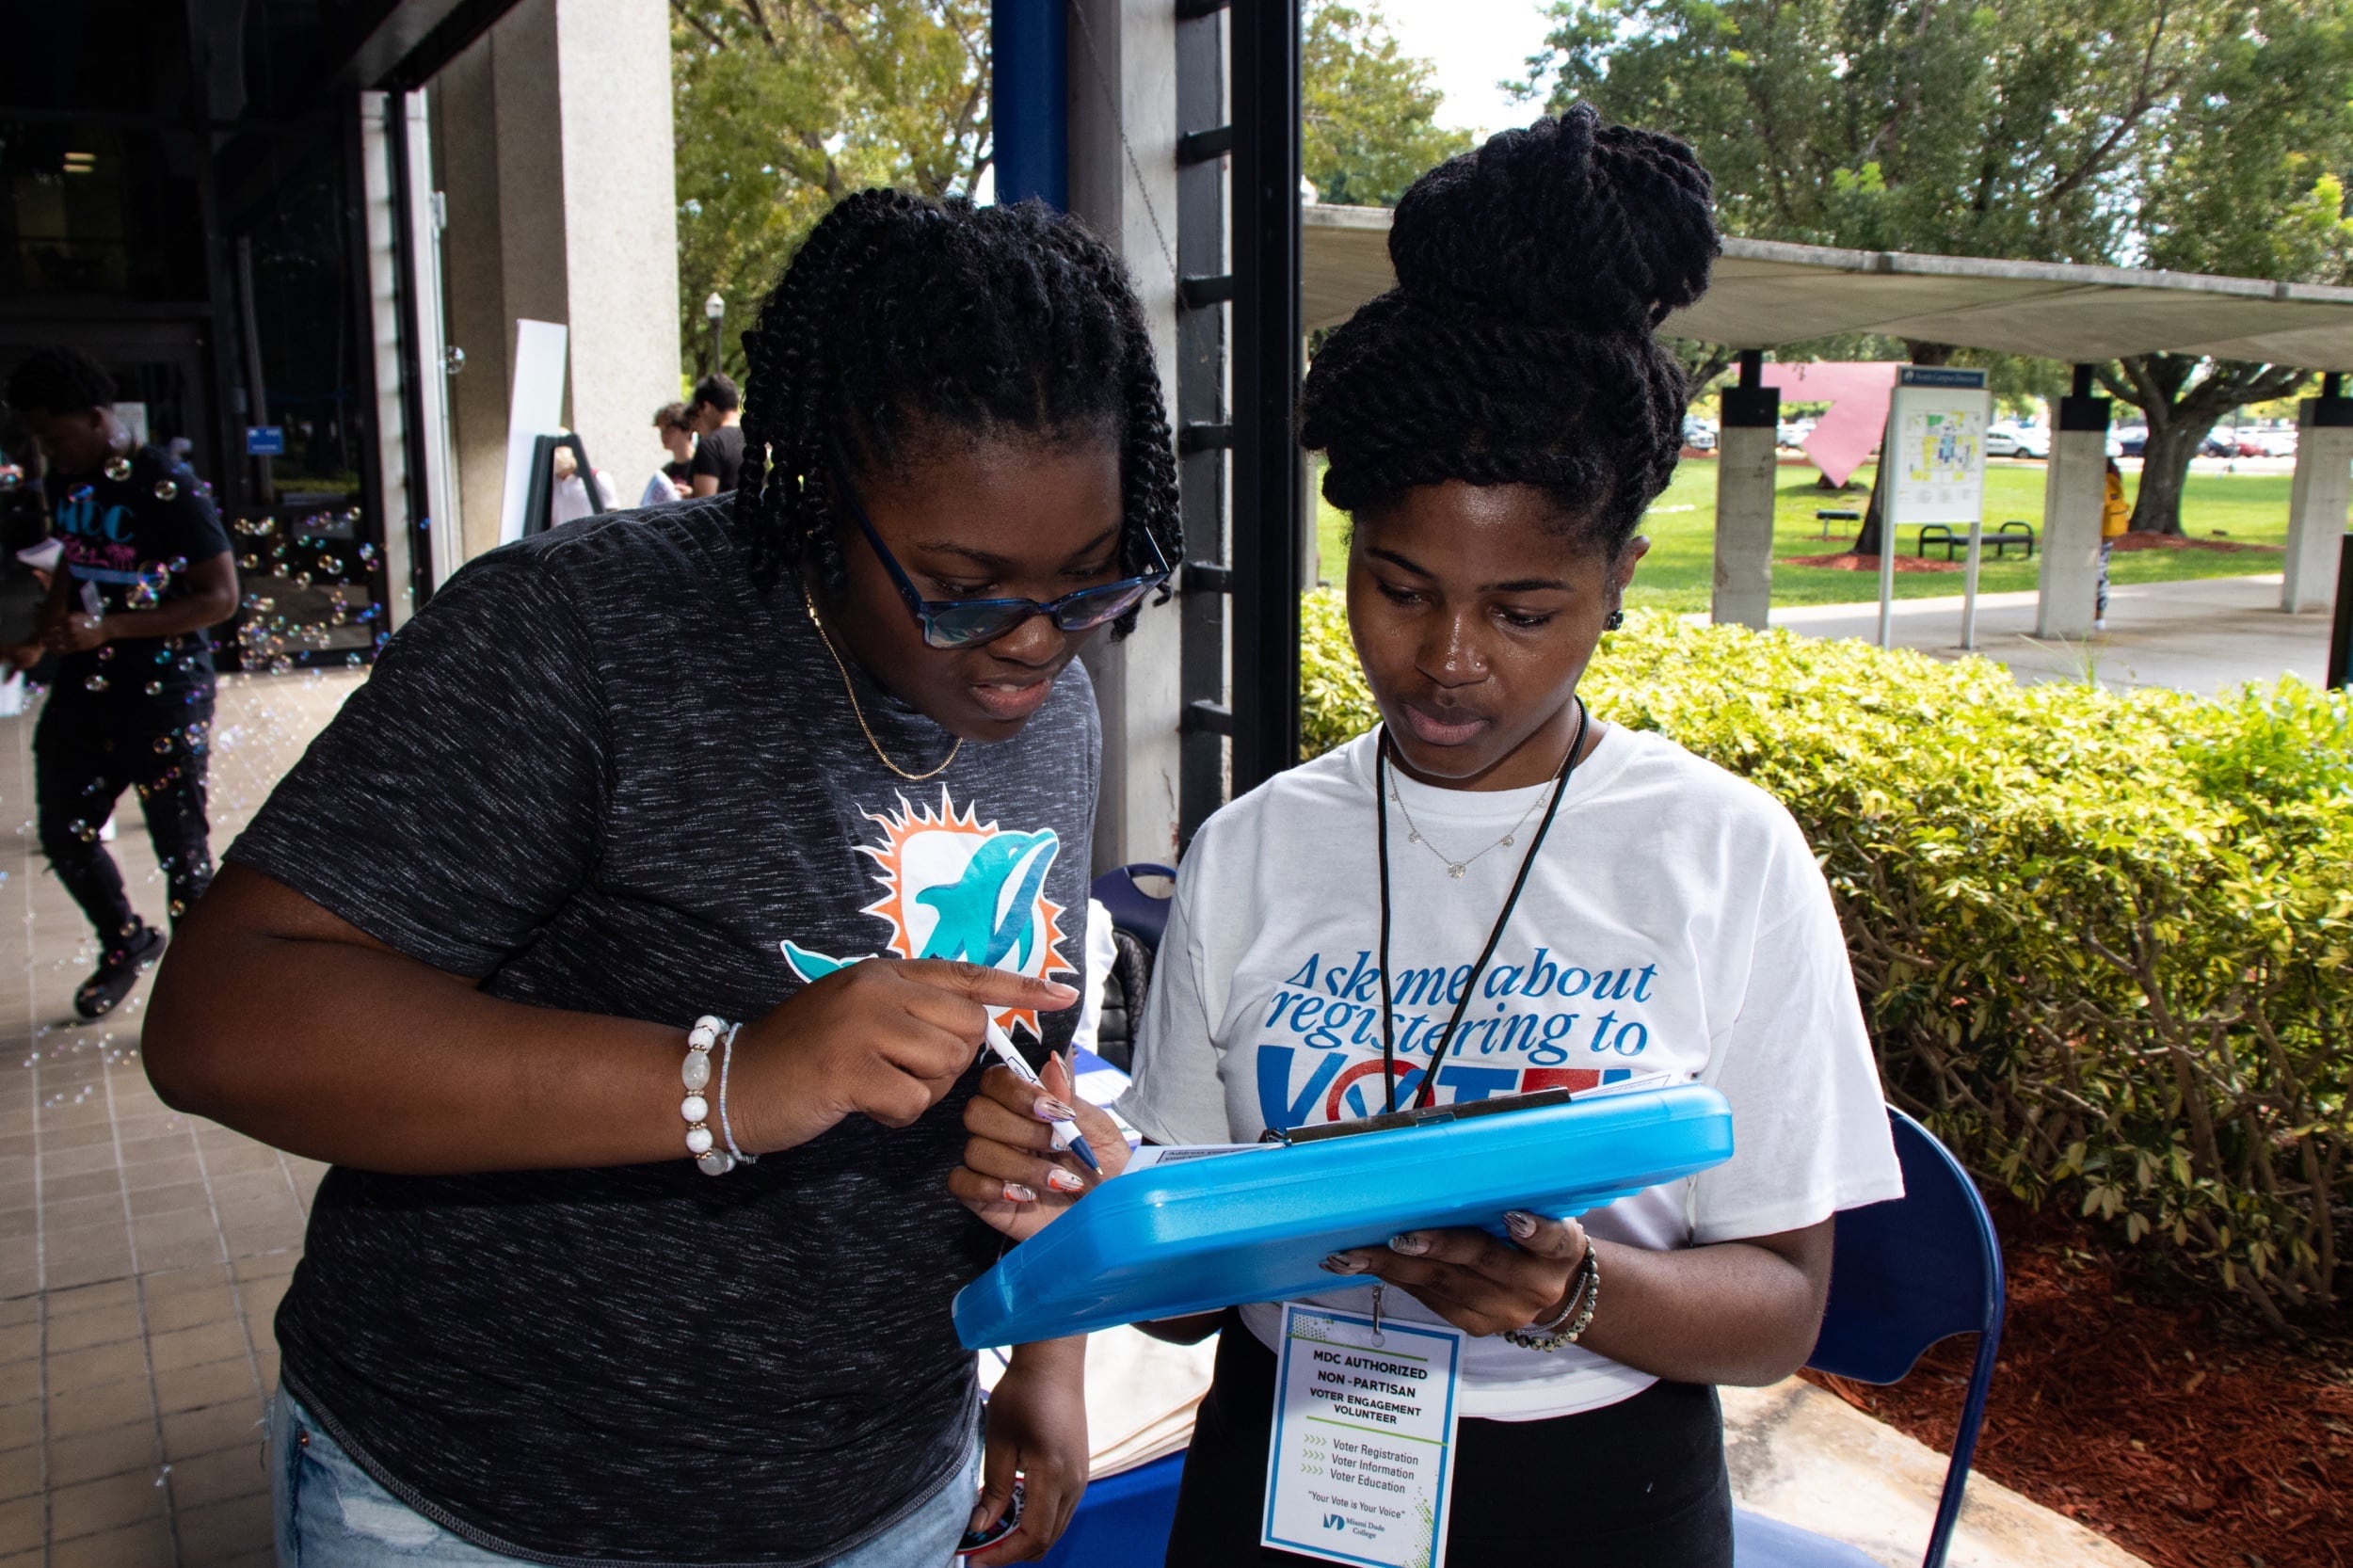 A volunteer from Engage Miami helping community members register to vote.